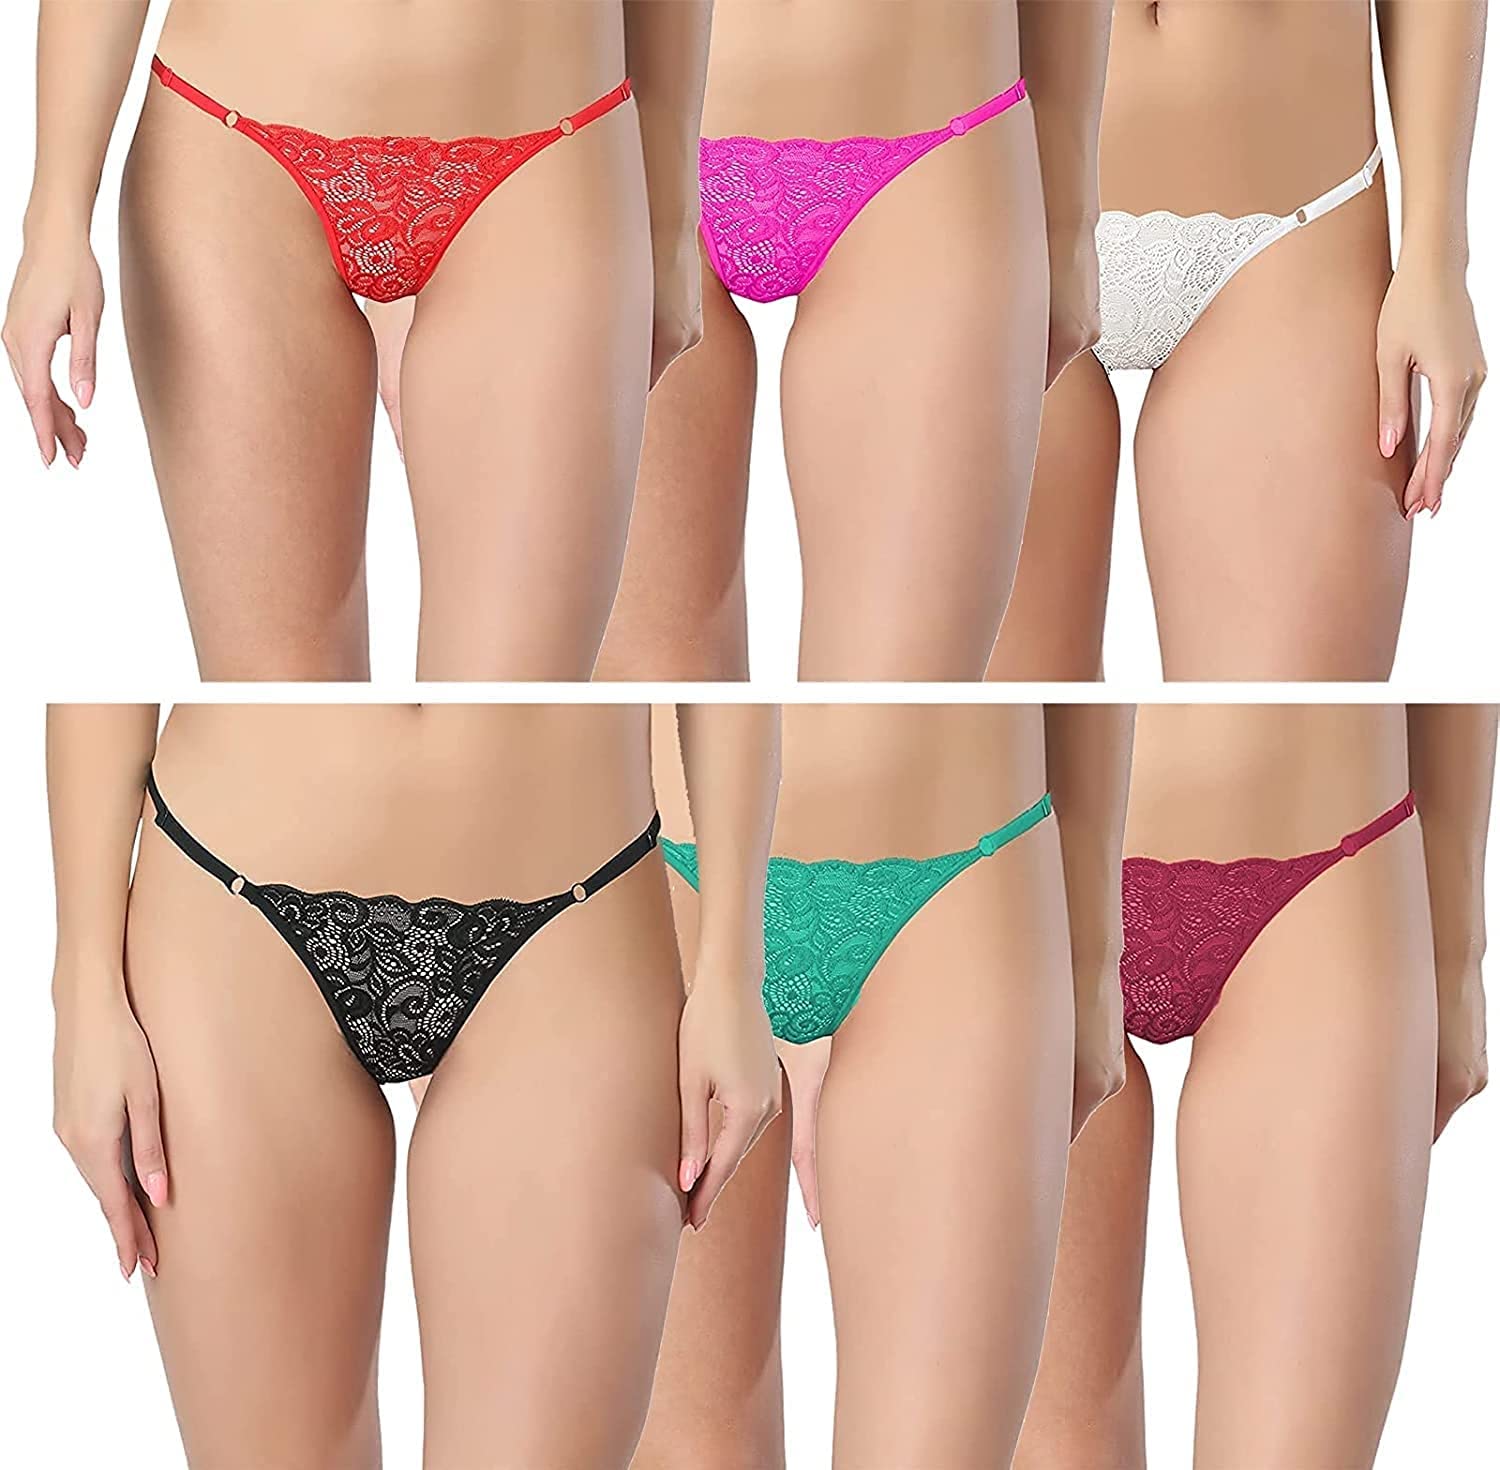 Women's Lace G-String Set - Pack of 4